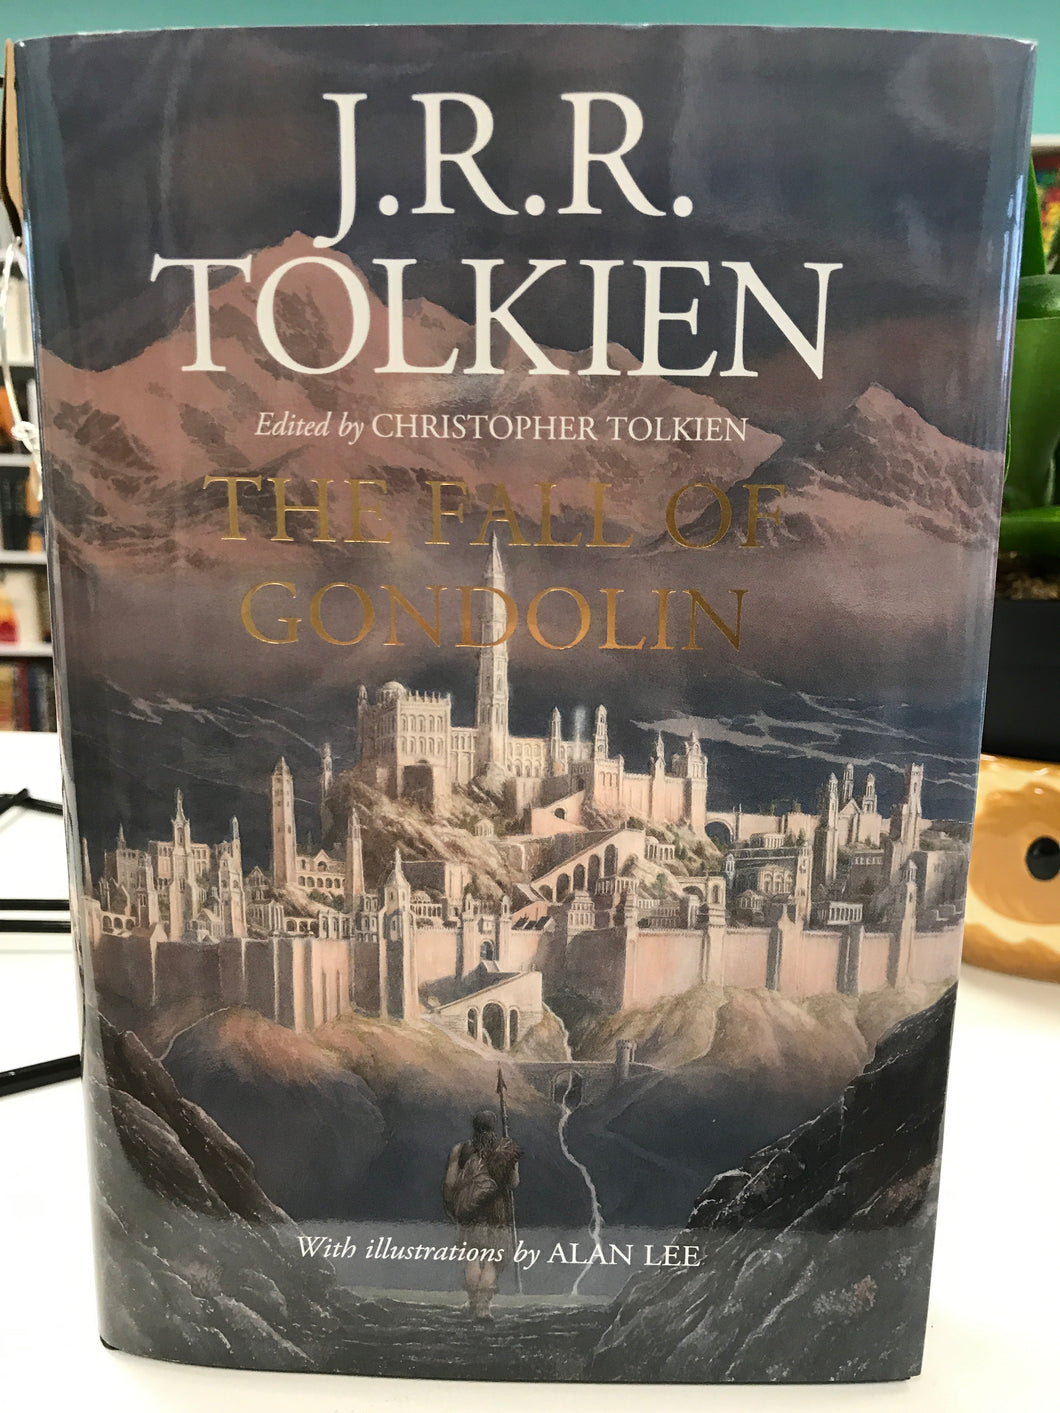 The Fall of Gondolin by J.R.R. TOLKIEN